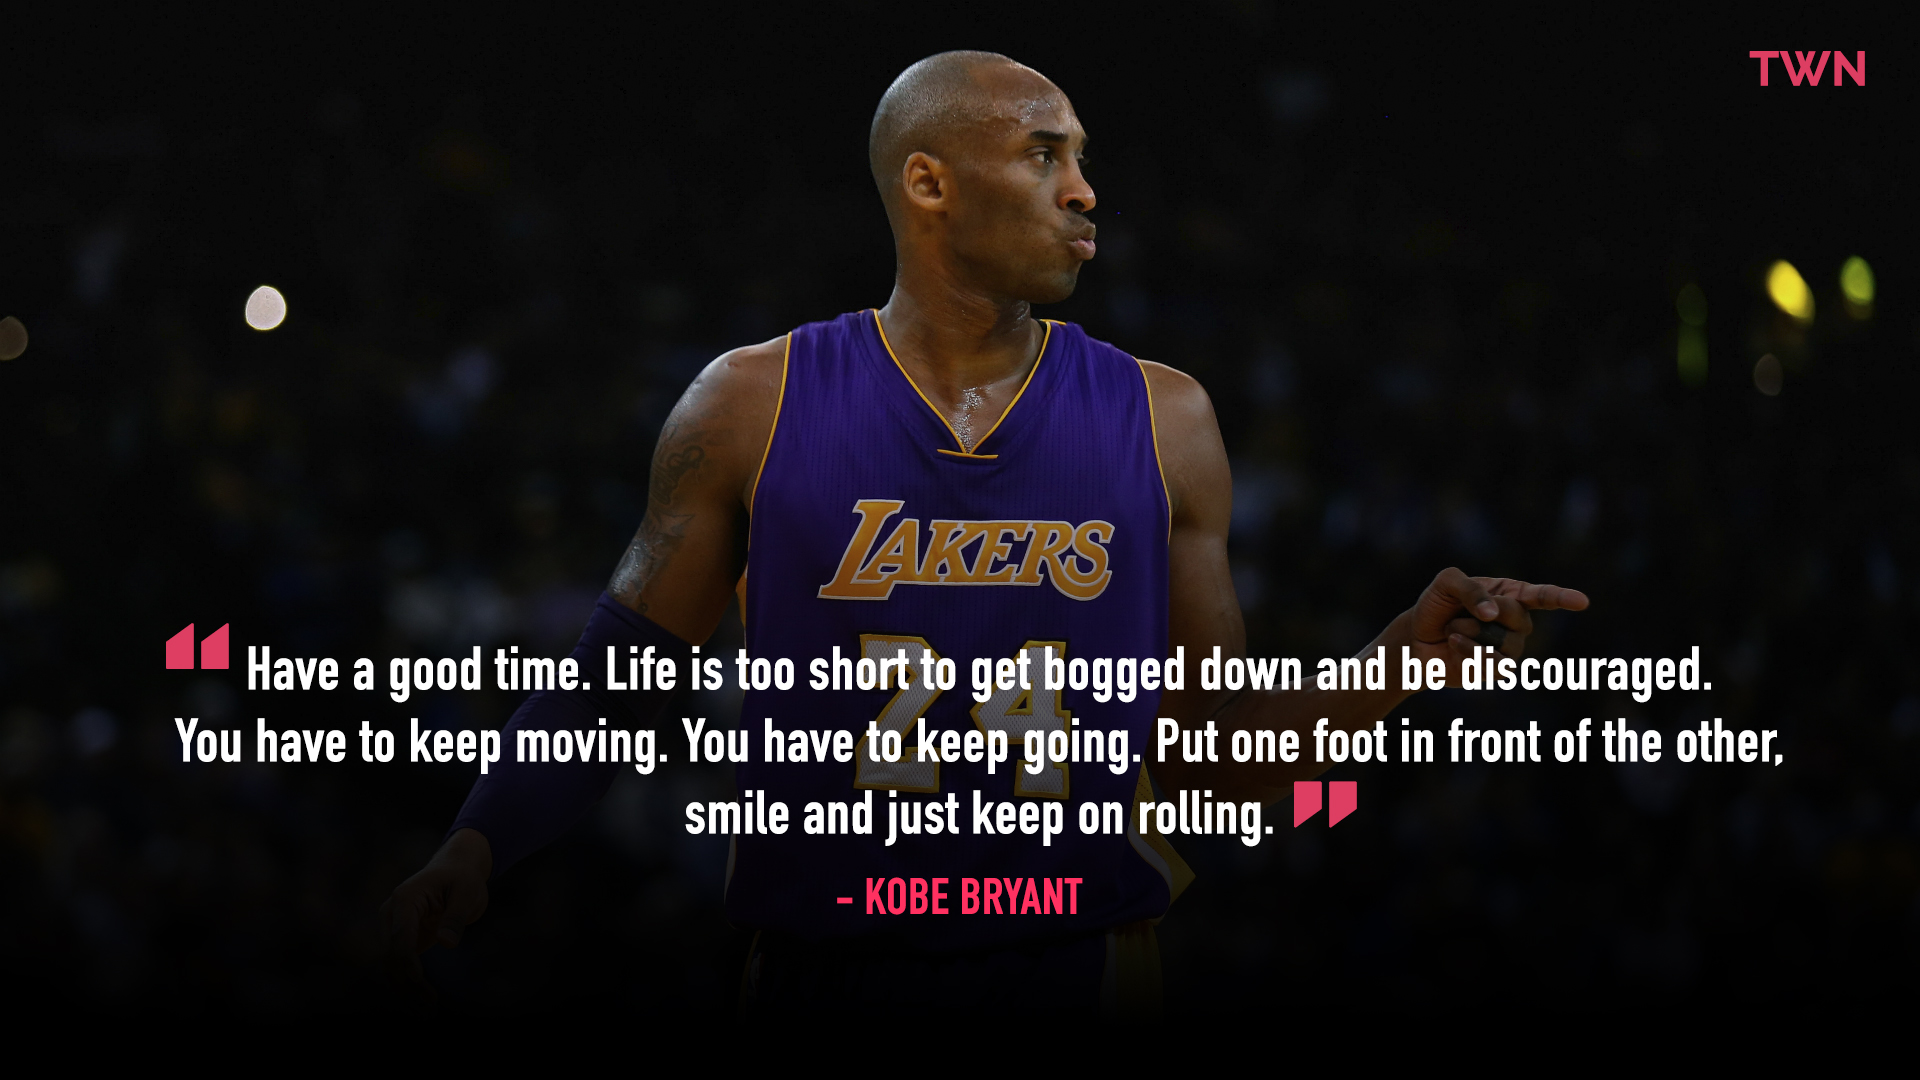 Amazing Kobe Bryant Motivational Quotes  Don t miss out 